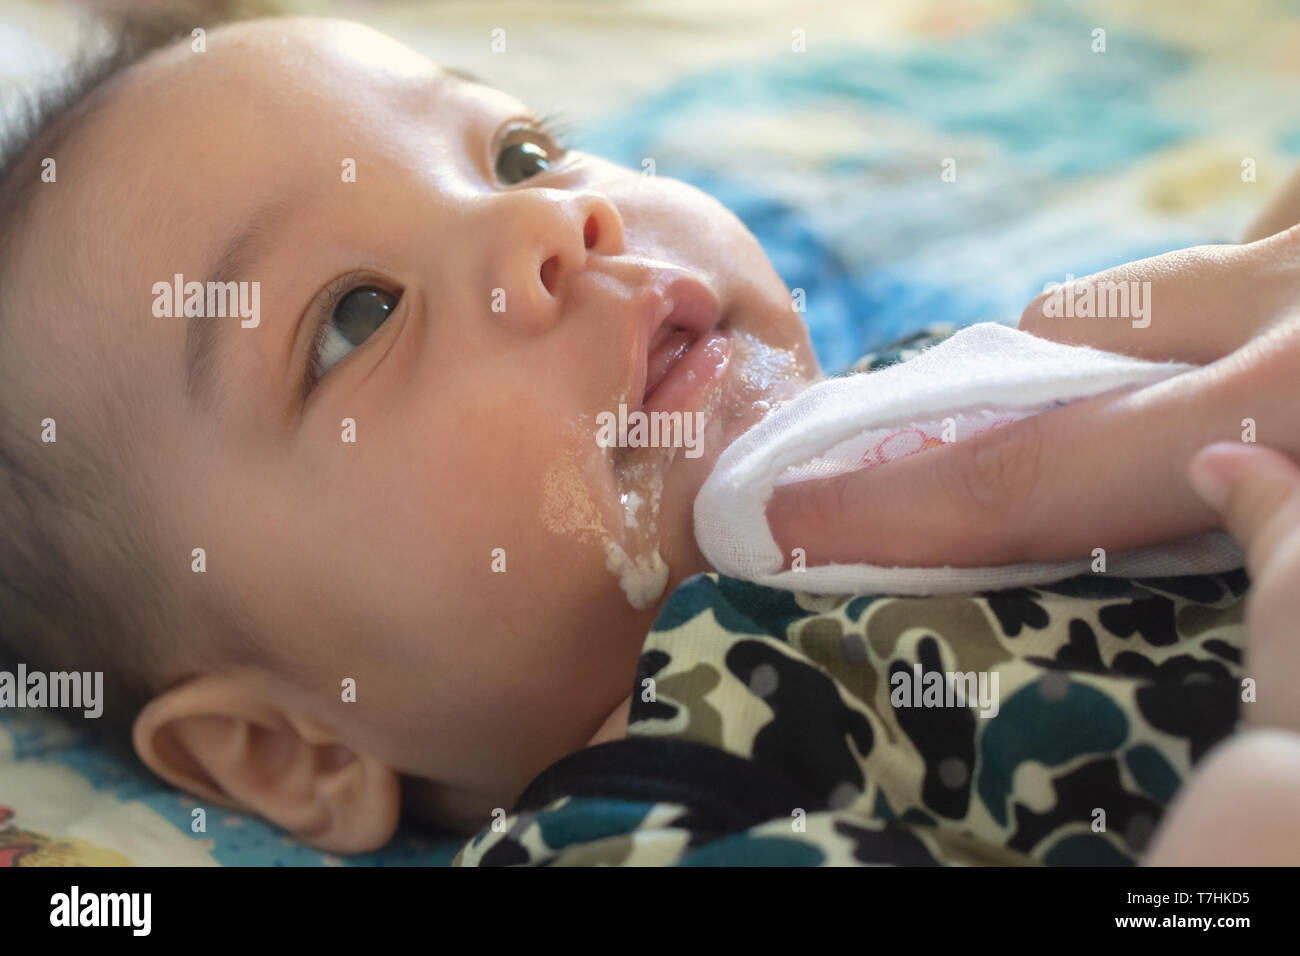 asian mother is wiping her baby's face after infant baby boy vomiting with soft sunbeam. people and family lifestyle concept. Stock Photo